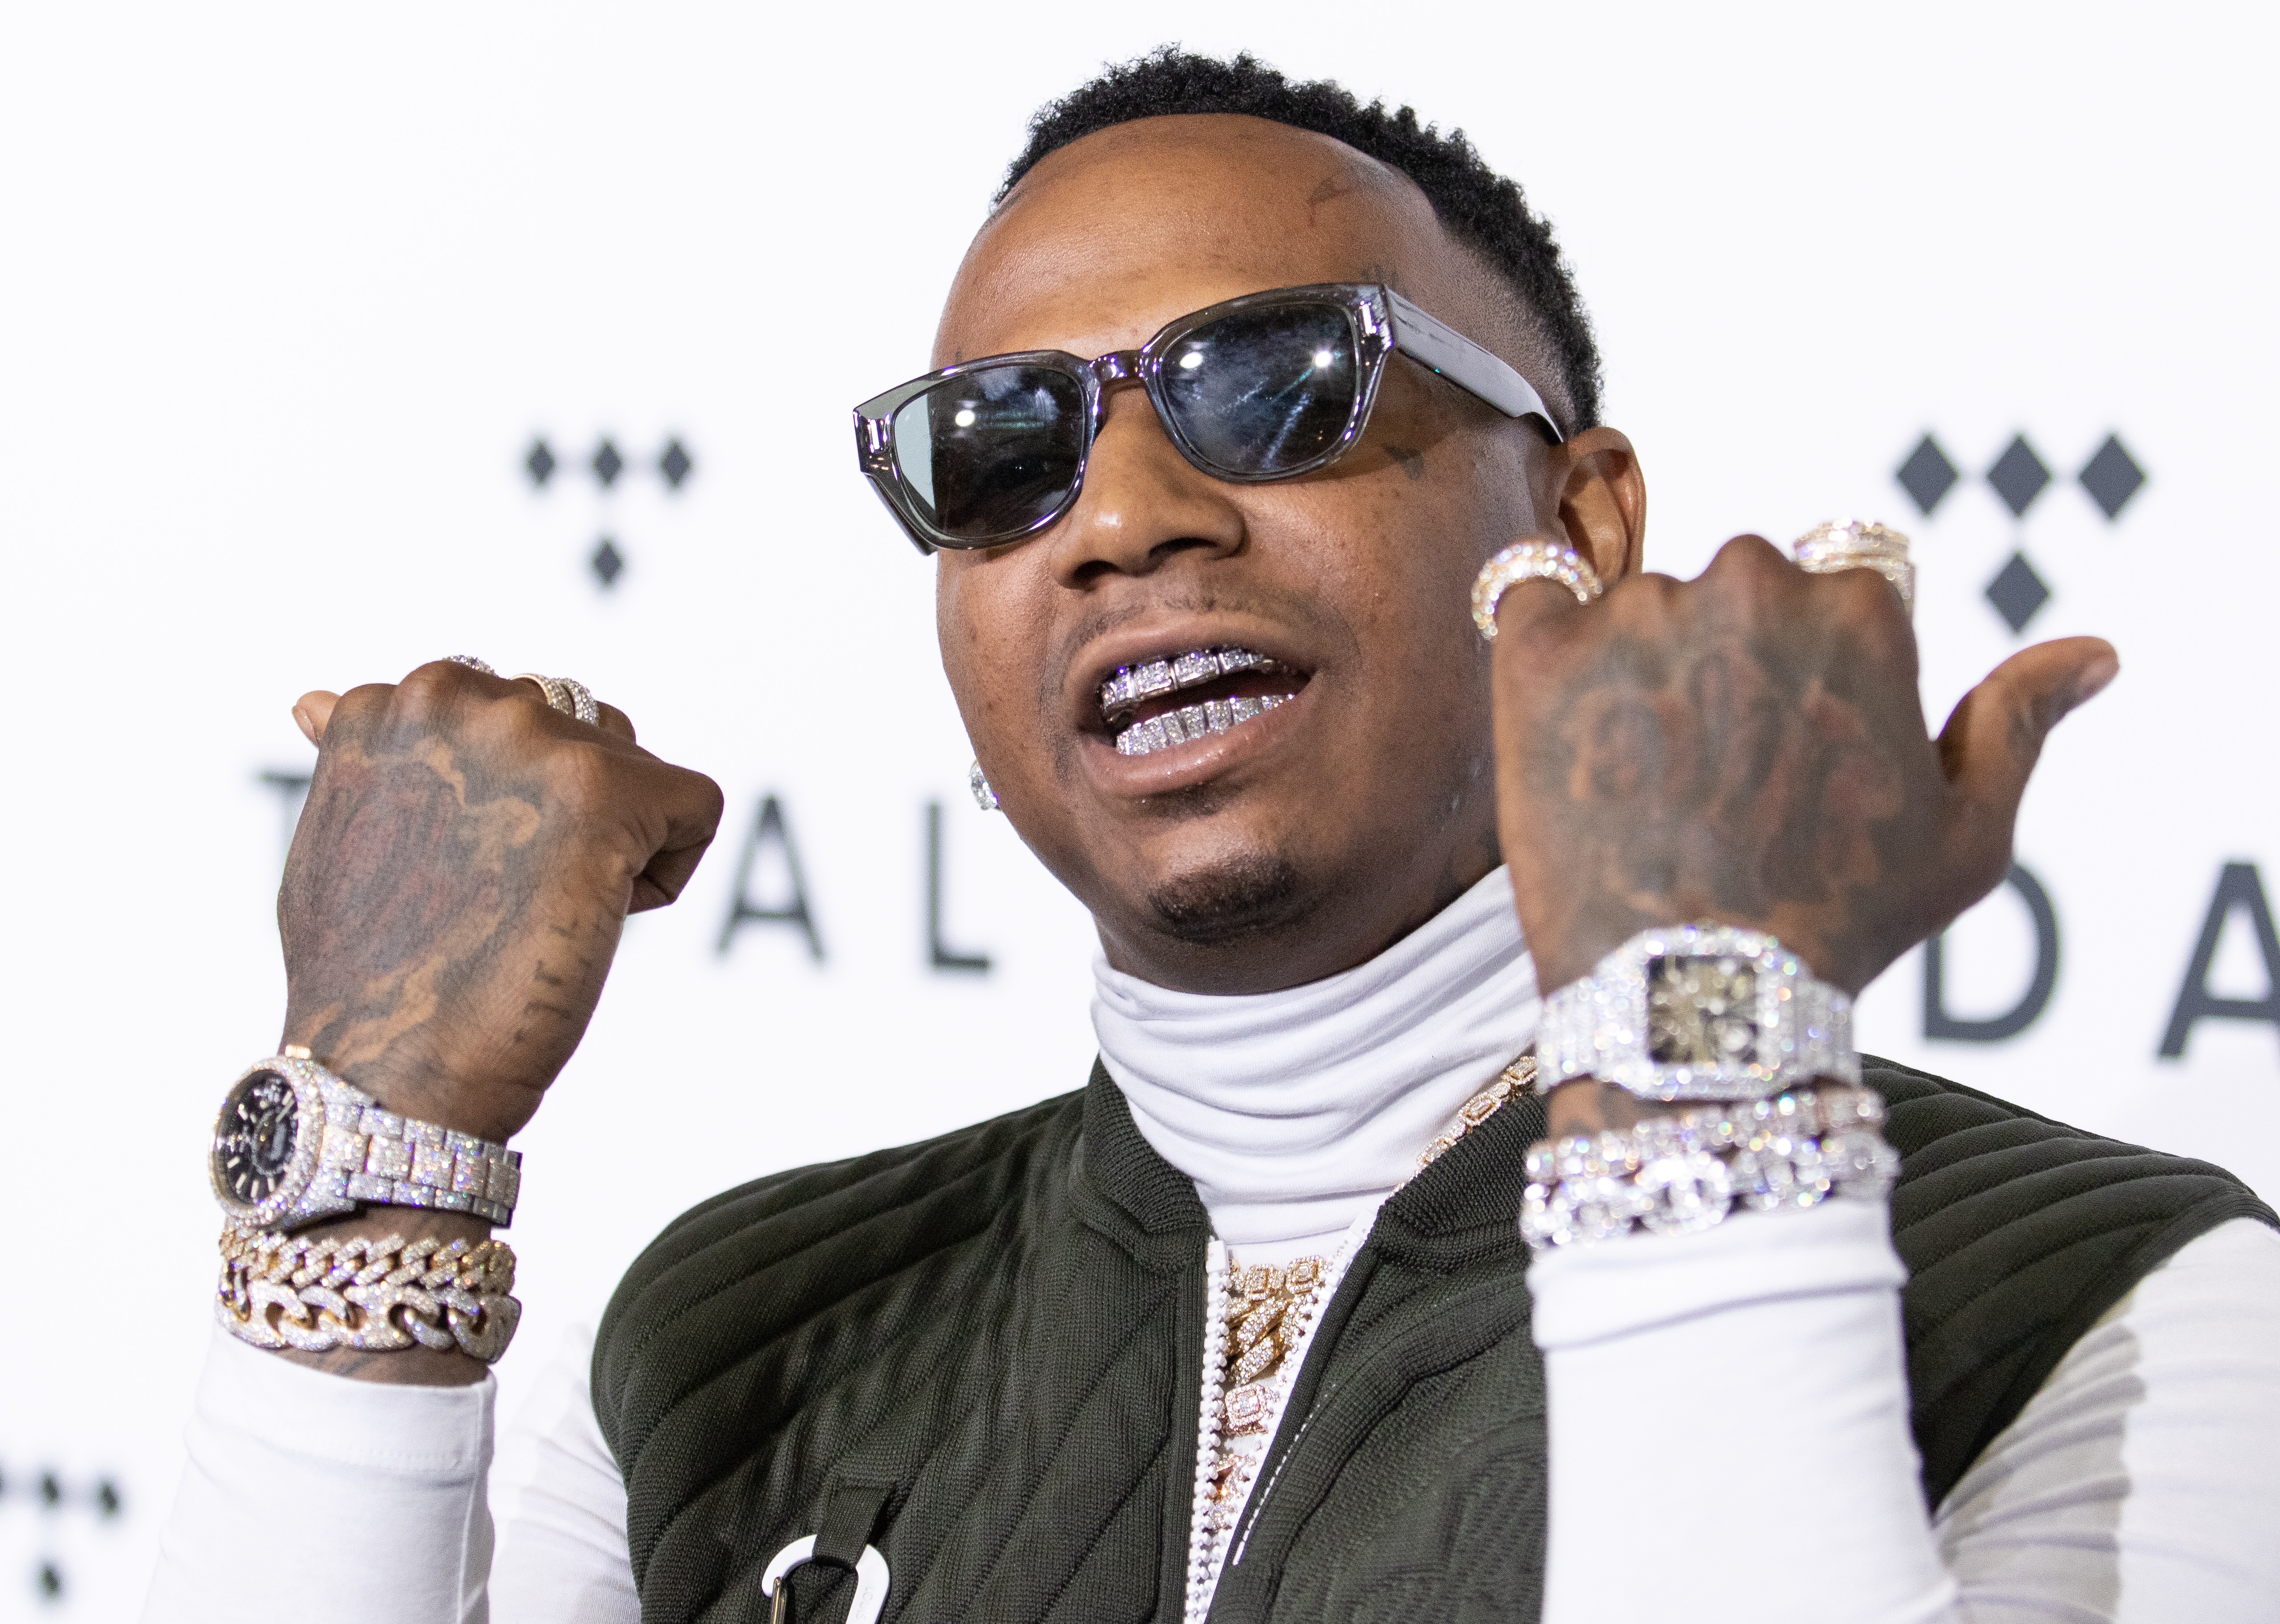 MoneyBagg Yo spent more than $22,000 on 25 items during the shopping period  - UAE Times